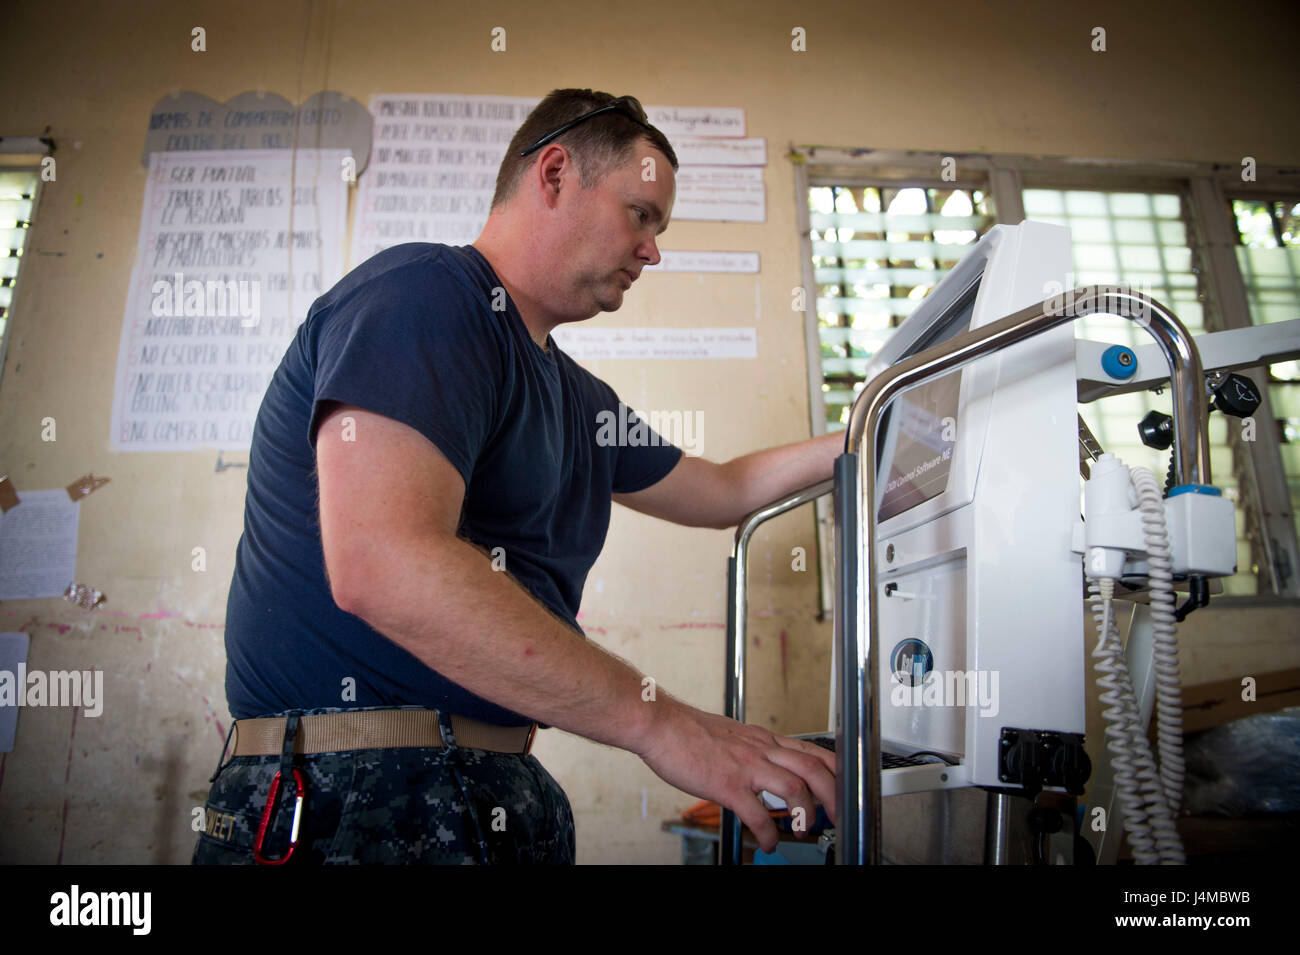 170220-N-YL073-109 TRUJILLO, Honduras (Feb. 20, 2017) – Lt. Cmdr. Nicholas Sweet, a native of Grenada, Miss., assigned to Naval Hospital Camp Lejeune, N.C., configures an X-ray machine at the Continuing Promise 2017 (CP-17) medical site in support of CP-17's visit to Trujillo, Honduras. CP-17 is a U.S. Southern Command-sponsored and U.S. Naval Forces Southern Command/U.S. 4th Fleet-conducted deployment to conduct civil-military operations including humanitarian assistance, training engagements, and medical, dental, and veterinary support in an effort to show U.S. support and commitment to Cent Stock Photo